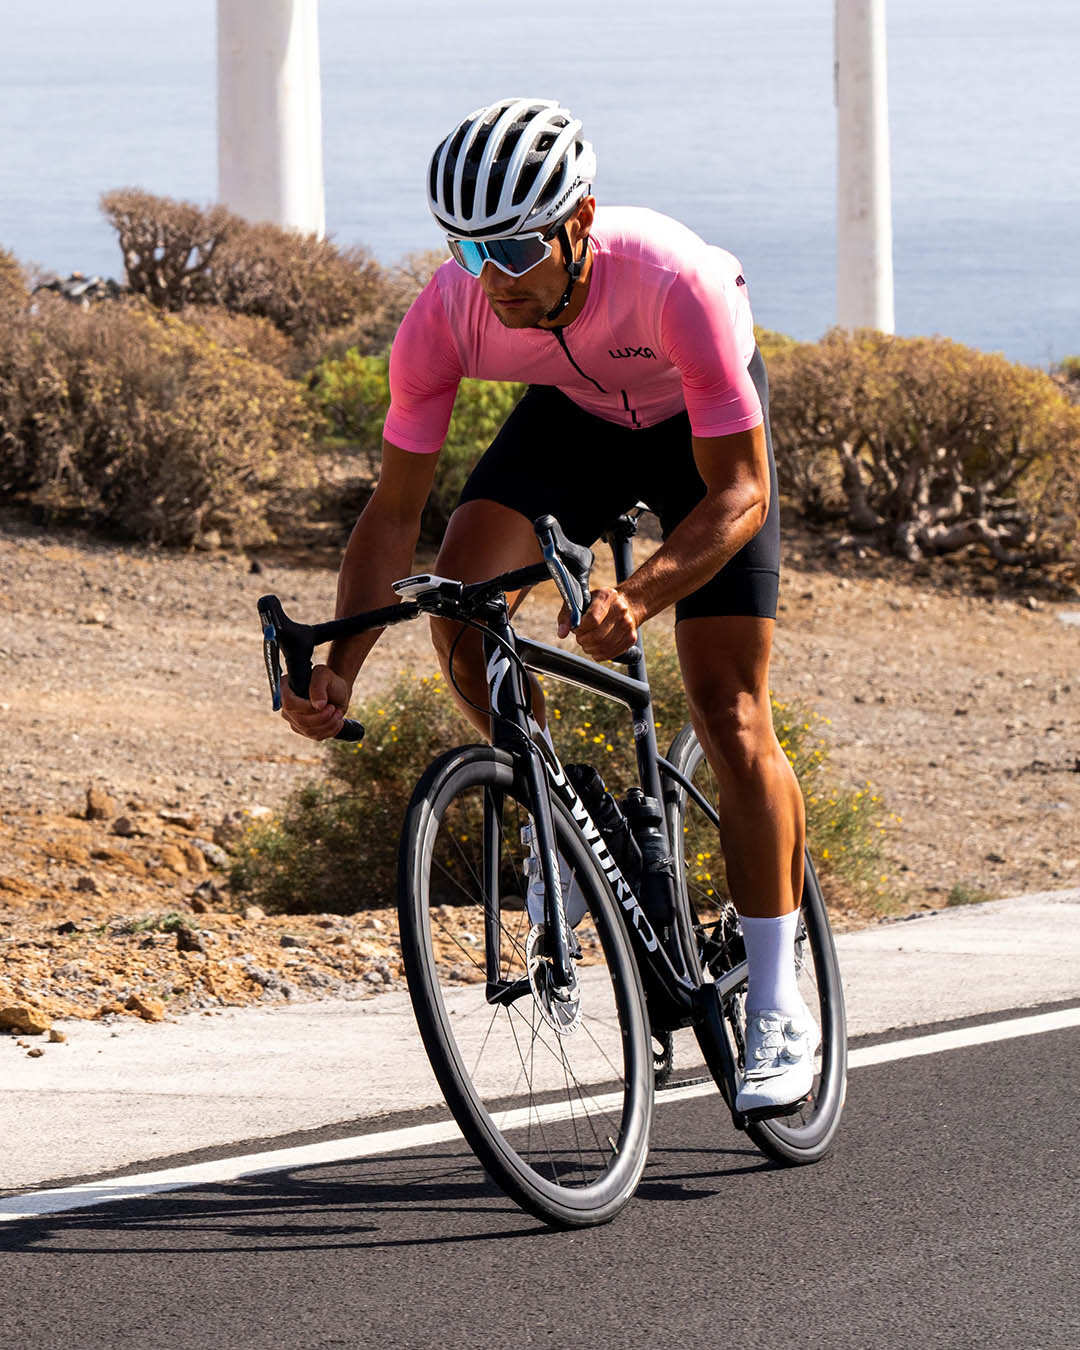 Road cyclist in pink Luxa jersey and black bib shorts